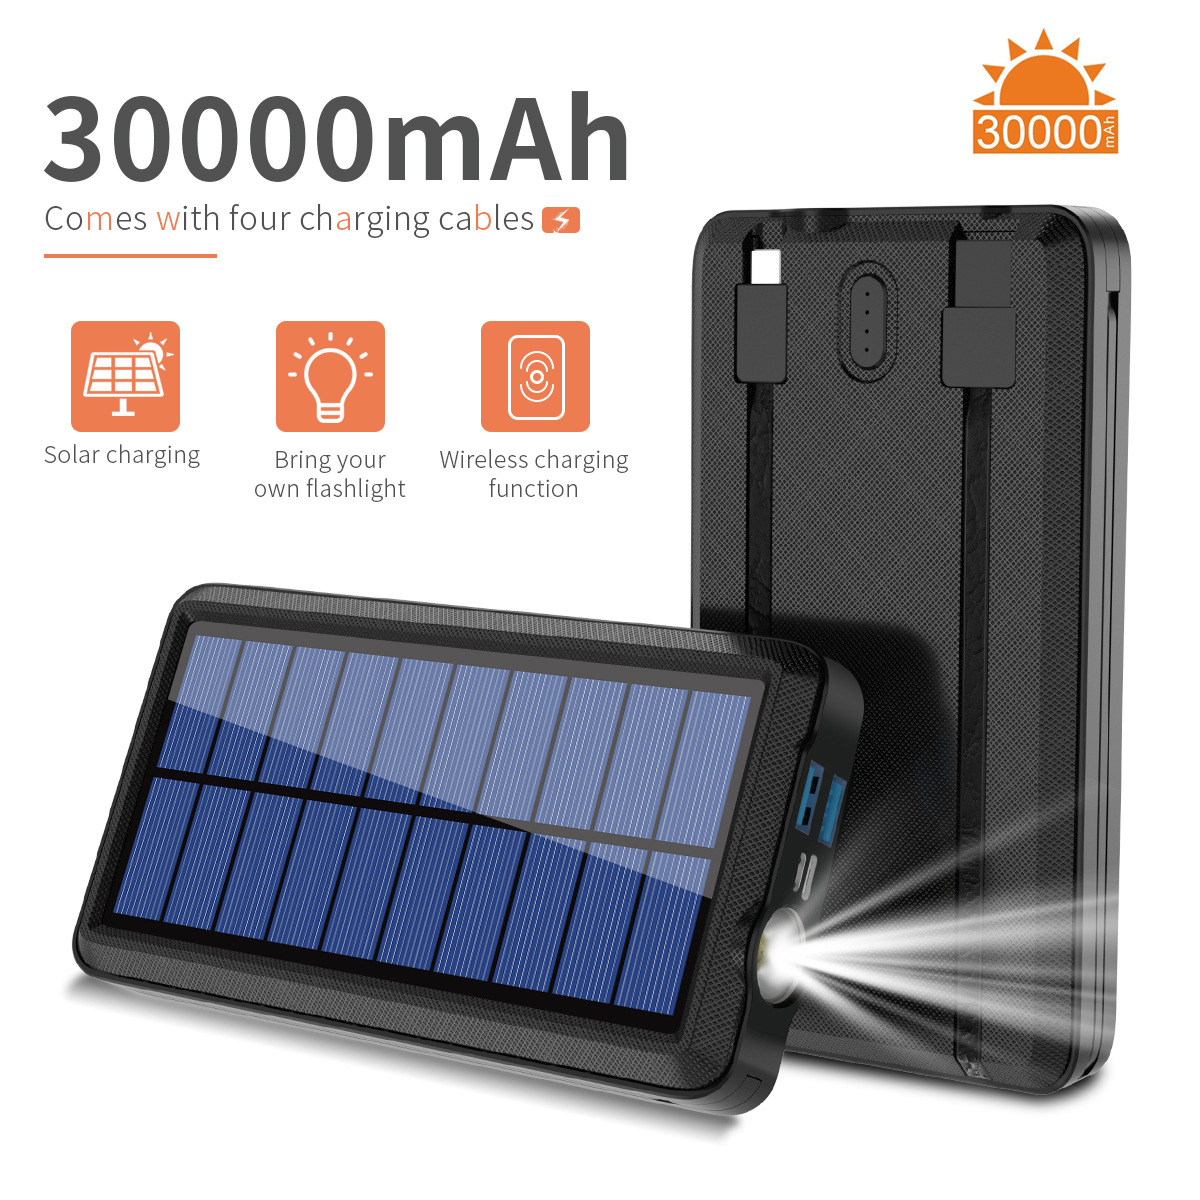 Bakeey-30000mAh-Solar-Panel-Dual-USB-Waterproof-Wireless-Charger-Power-Bank-with-Type-C-Micro-USB-In-1874905-1